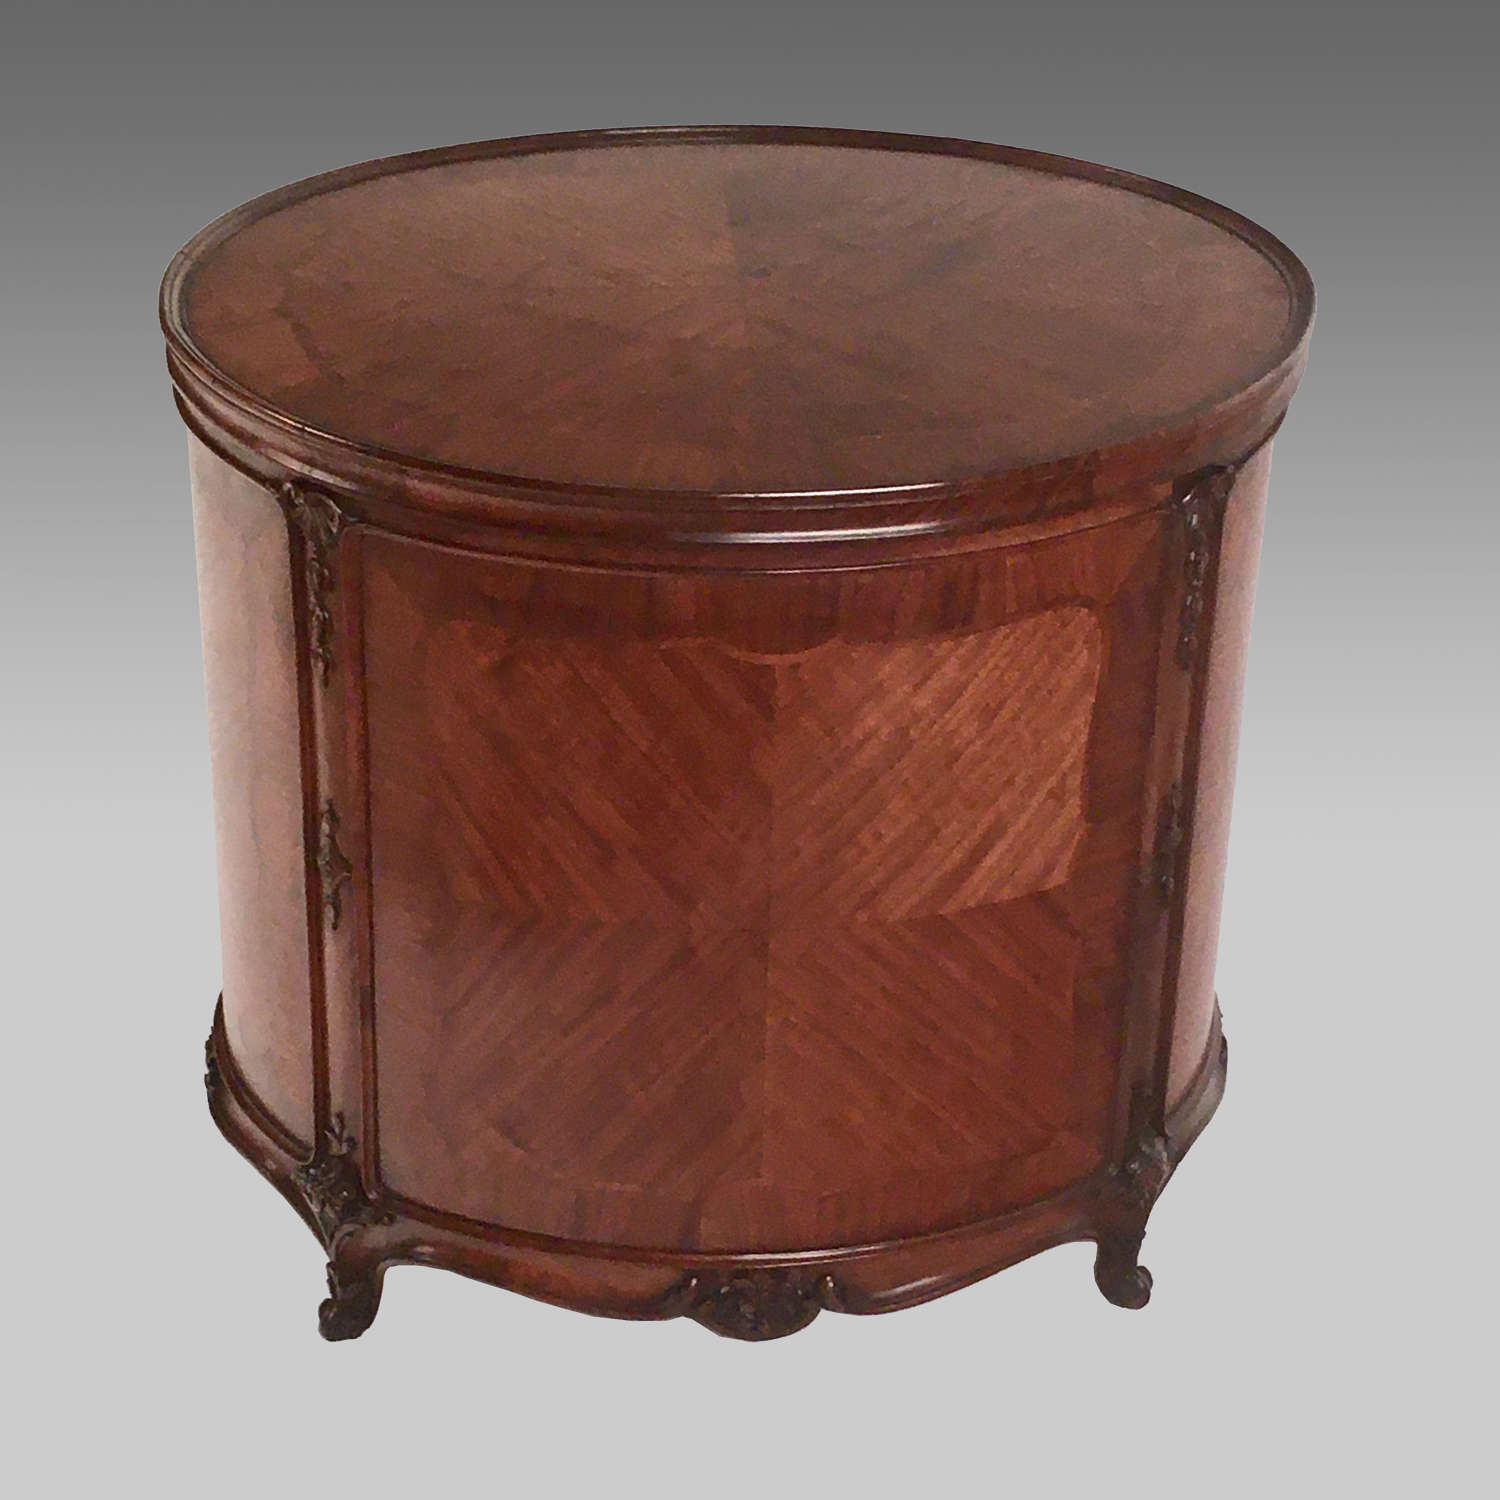 Anglo-French, Louis XV1 style walnut cellarette